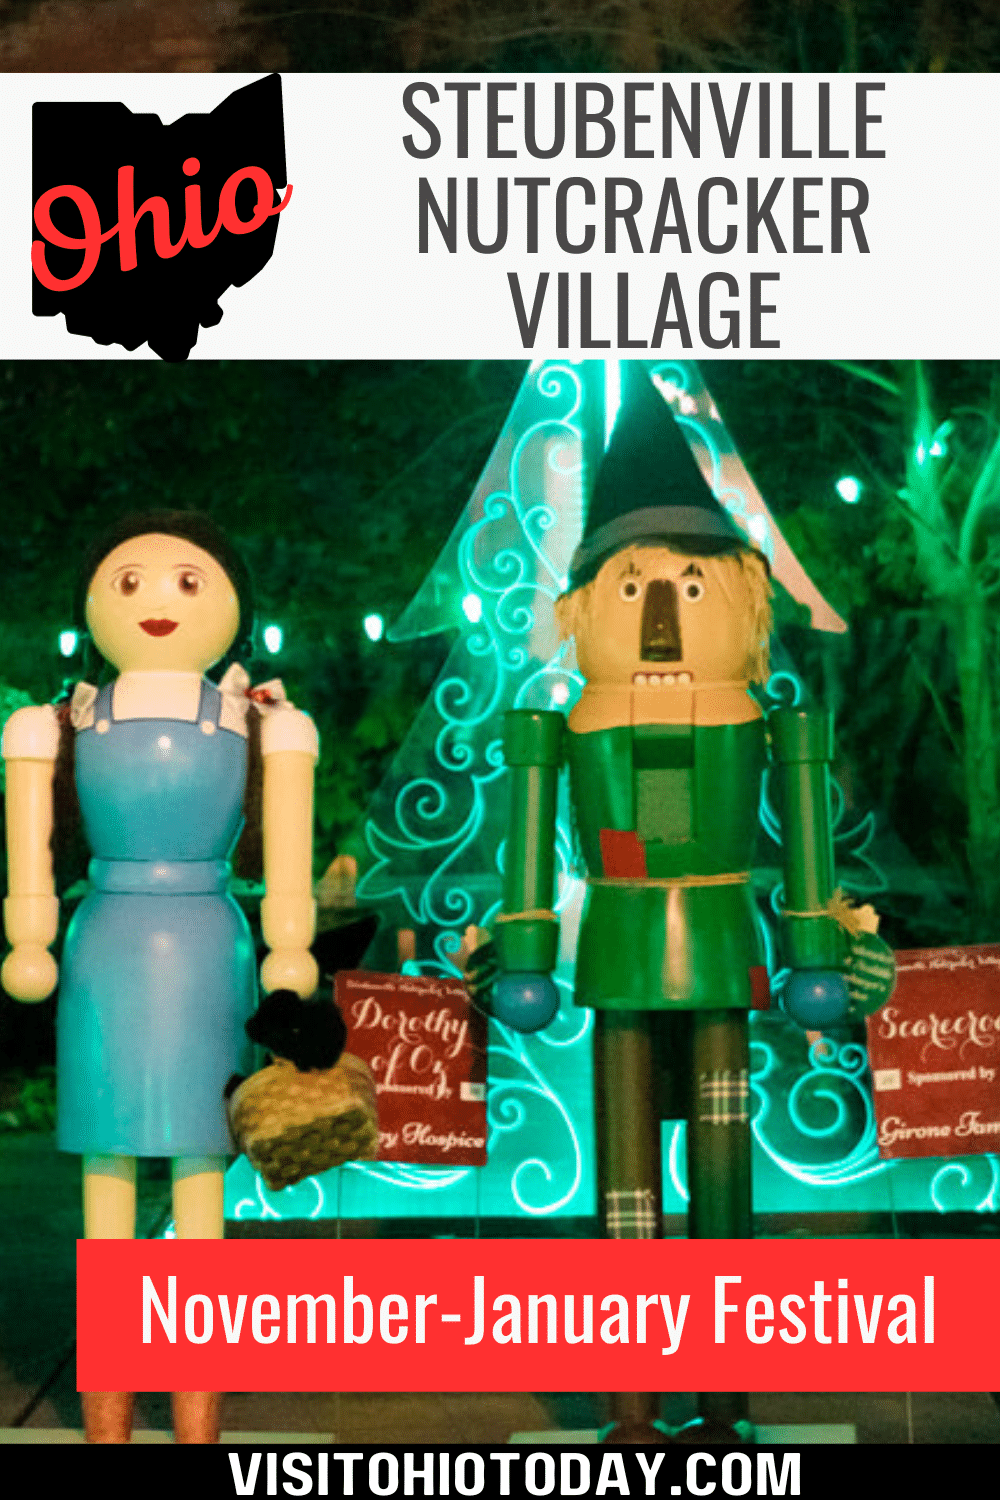 The Steubenville Nutcracker Village displays the largest collection of life-size nutcrackers in the world. Located in downtown Steubenville, the event is free and open 24 hours a day, from Tuesday, November 21, 2023, to Saturday, January 6, 2024.